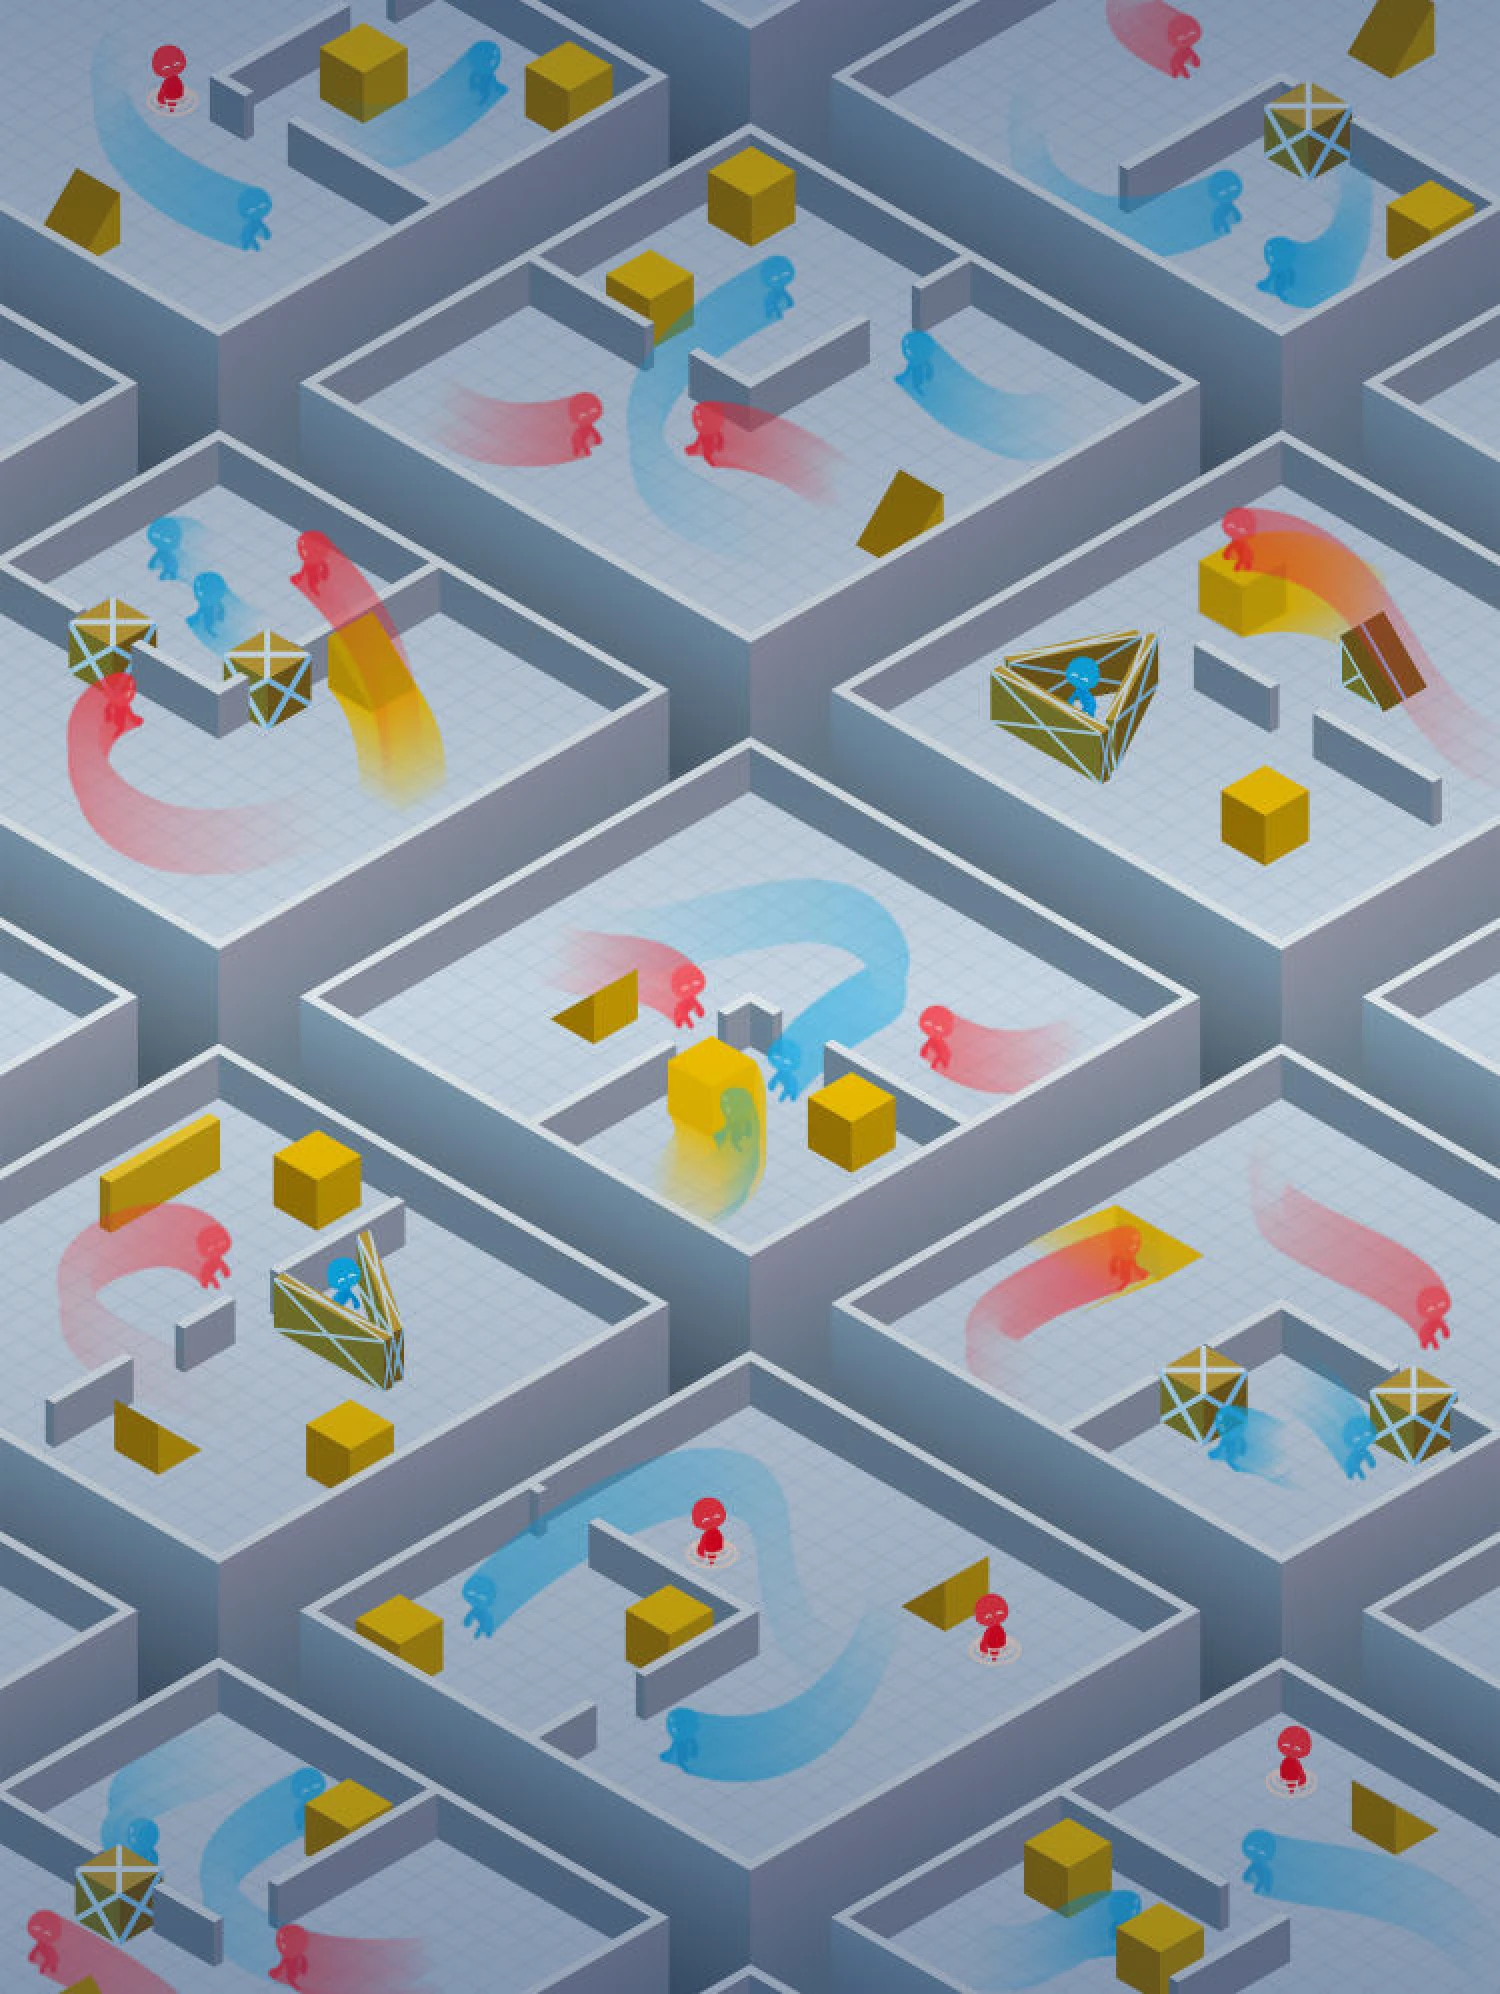 Isometric view of a gray grid with multi-agents playing hide and seek in each square